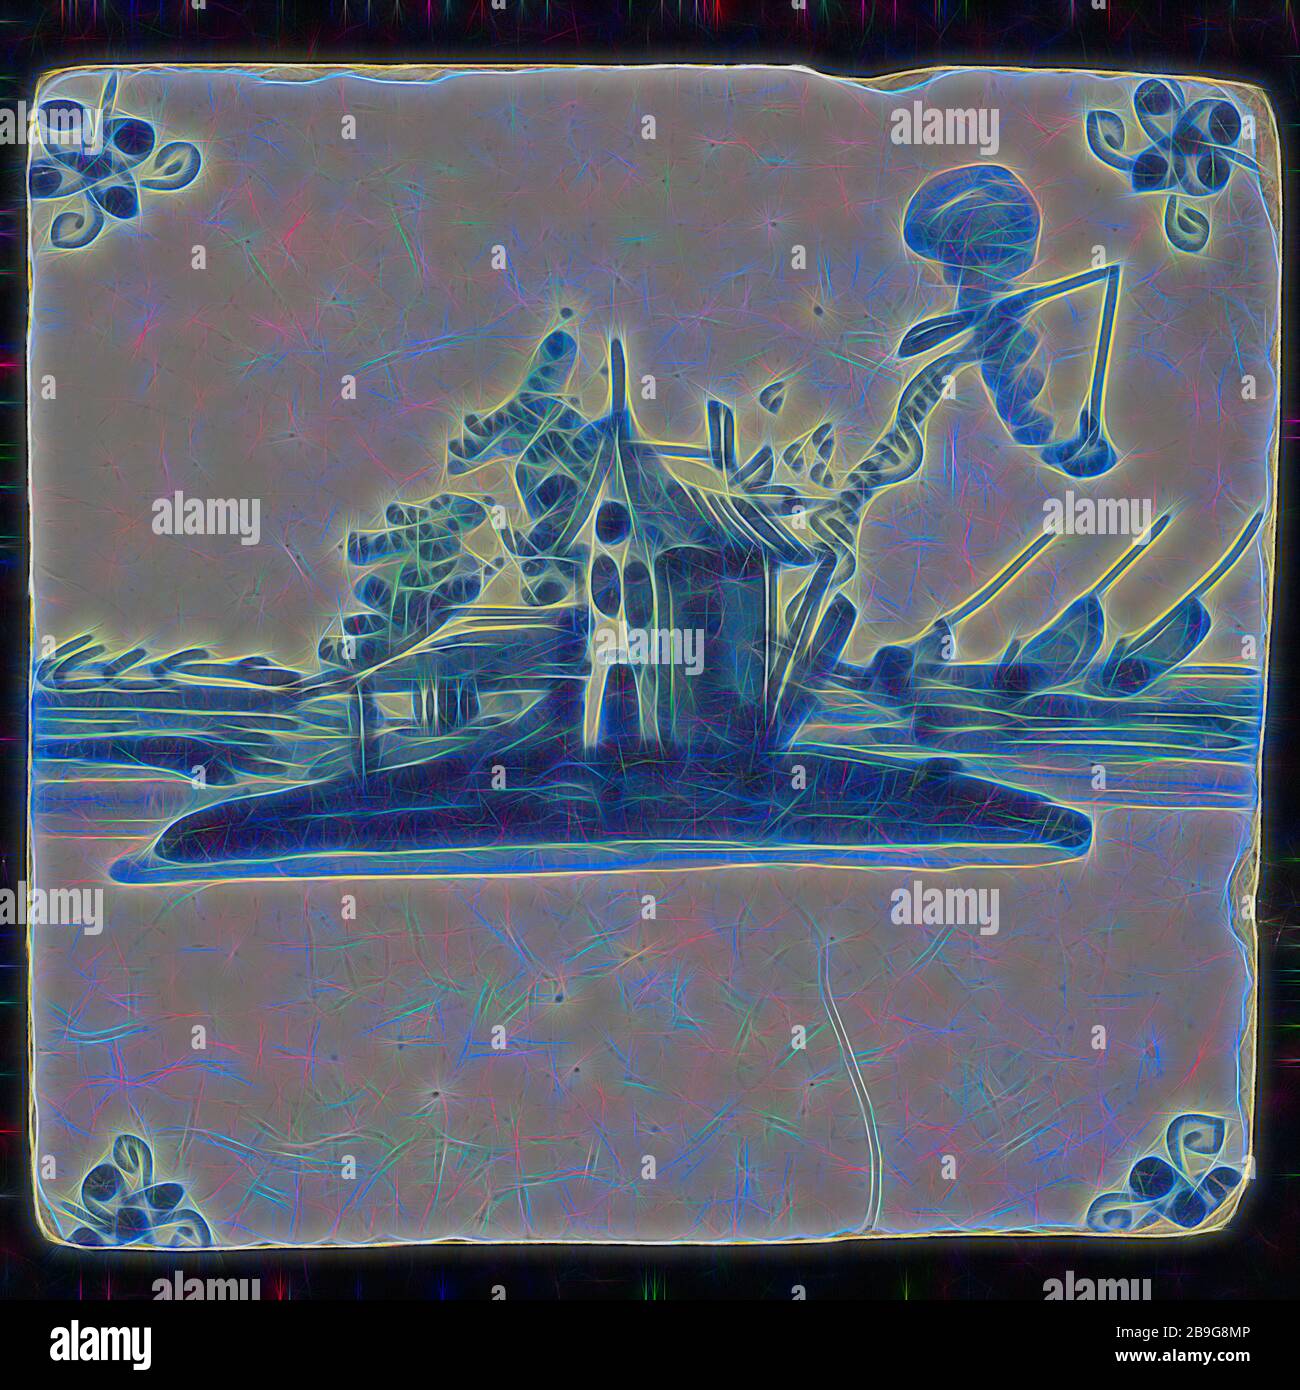 Scene tile, lighthouse and baakwoning, blue decor on white ground, corner fill spider, wall tile tile sculpture ceramic earthenware glaze tin glaze, in form made baked glazed painted baked Wall tile with blue decor on white fond Central view beacon with smoking fire pit next to the bail house On the backside right three sailing ships Dof glaze caused by inferior finish or by cleaning with corrosive acid Yellow shard. Shaved pottery. Corner filling spins Slightly slanted sides. Pastel native pottery Stock Photo